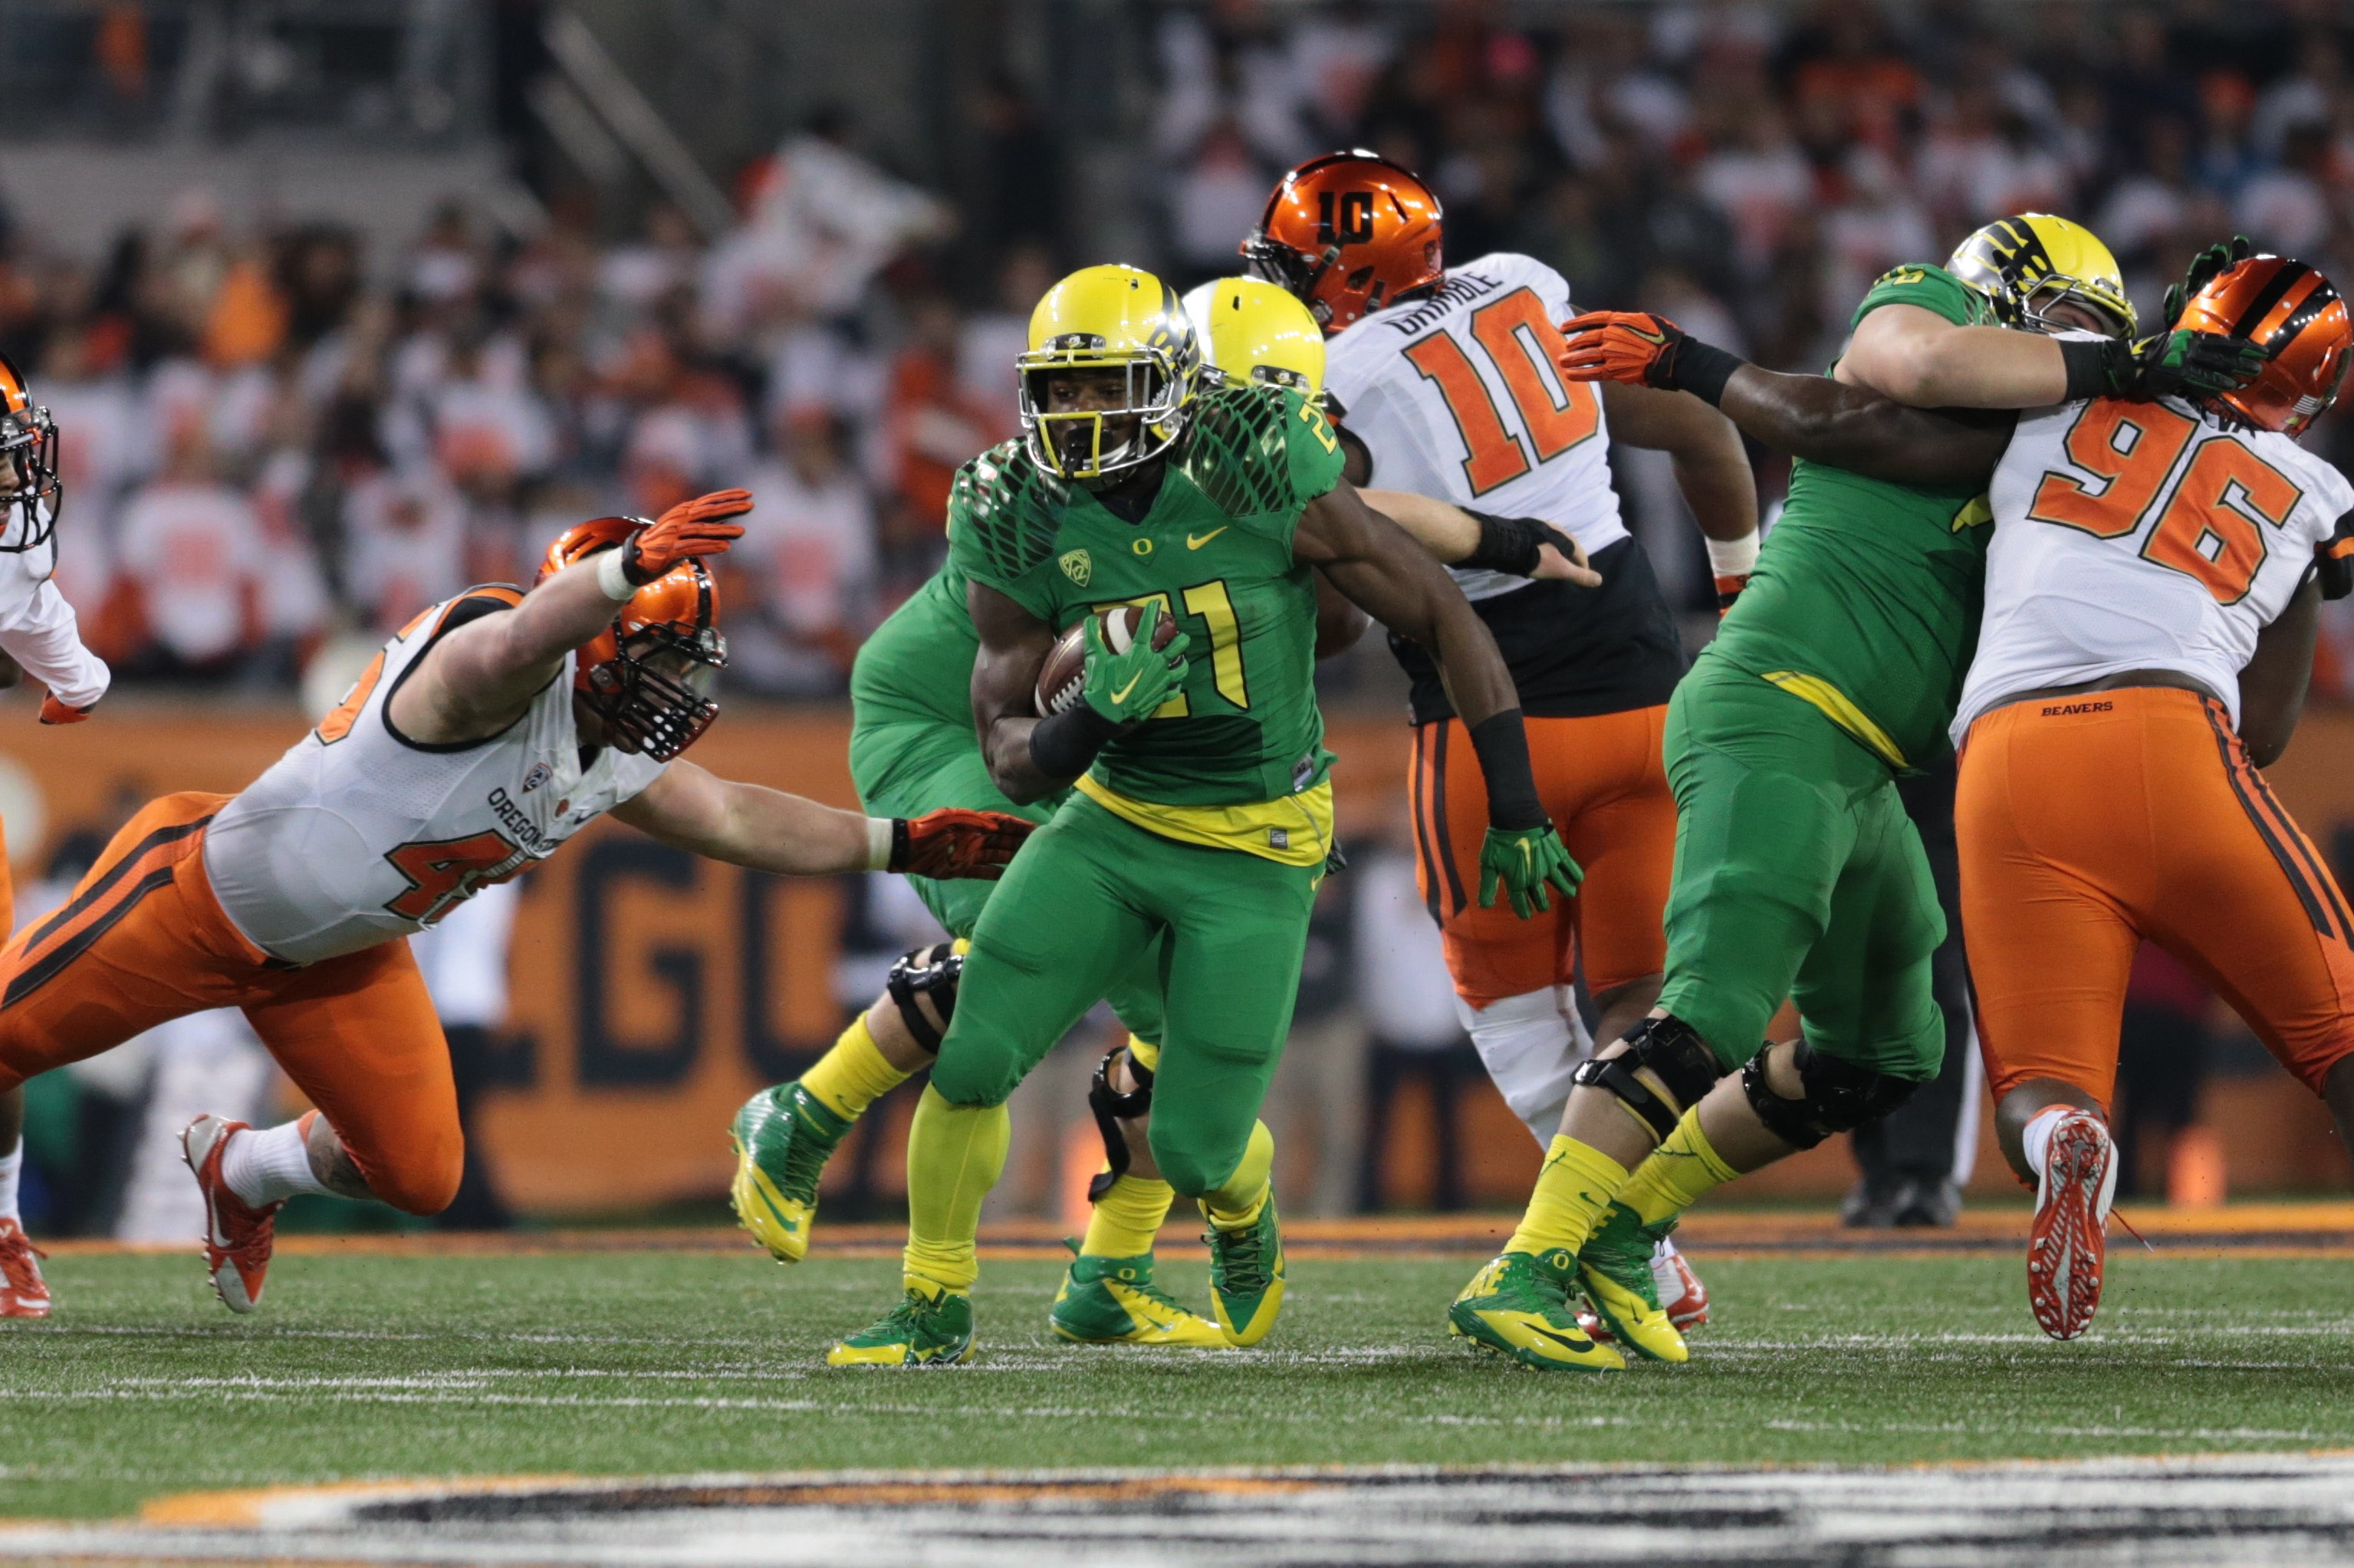 Could Taj Grifin come in and have a successful freshman year like Royce Freeman?